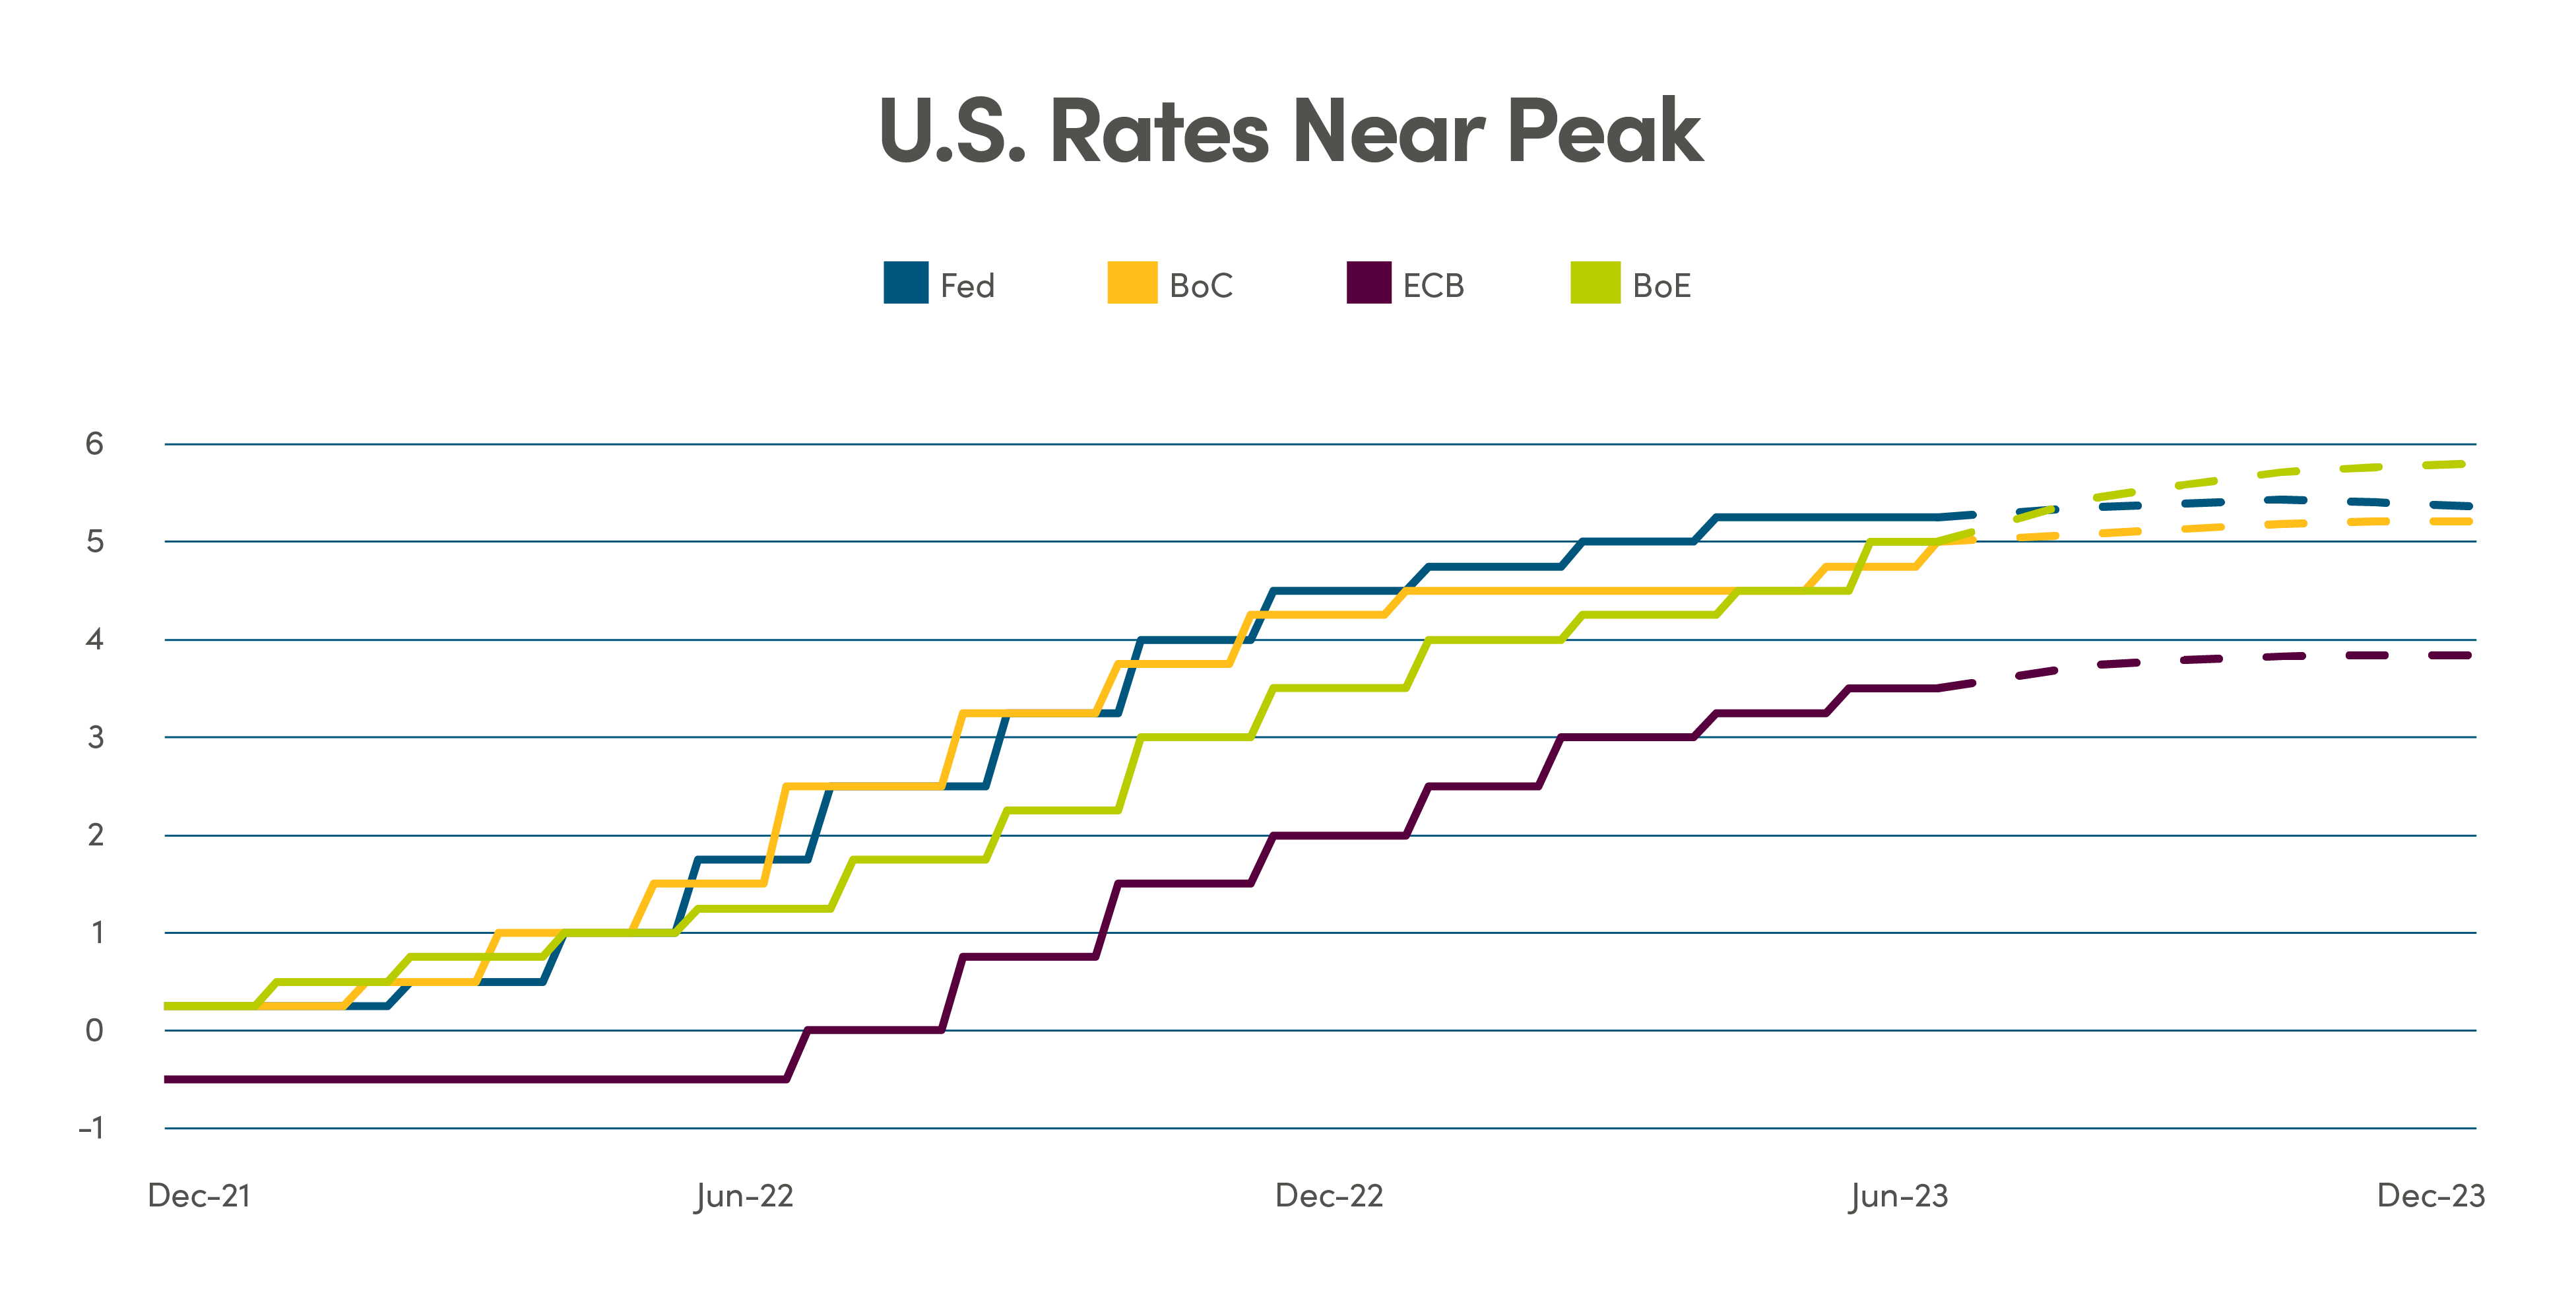 Line graph comparing Fed (US), BoC (Bank of Canada), ECB (European Central Bank) and BoE (Bank of England) policy rates from December 2021 to December 2023